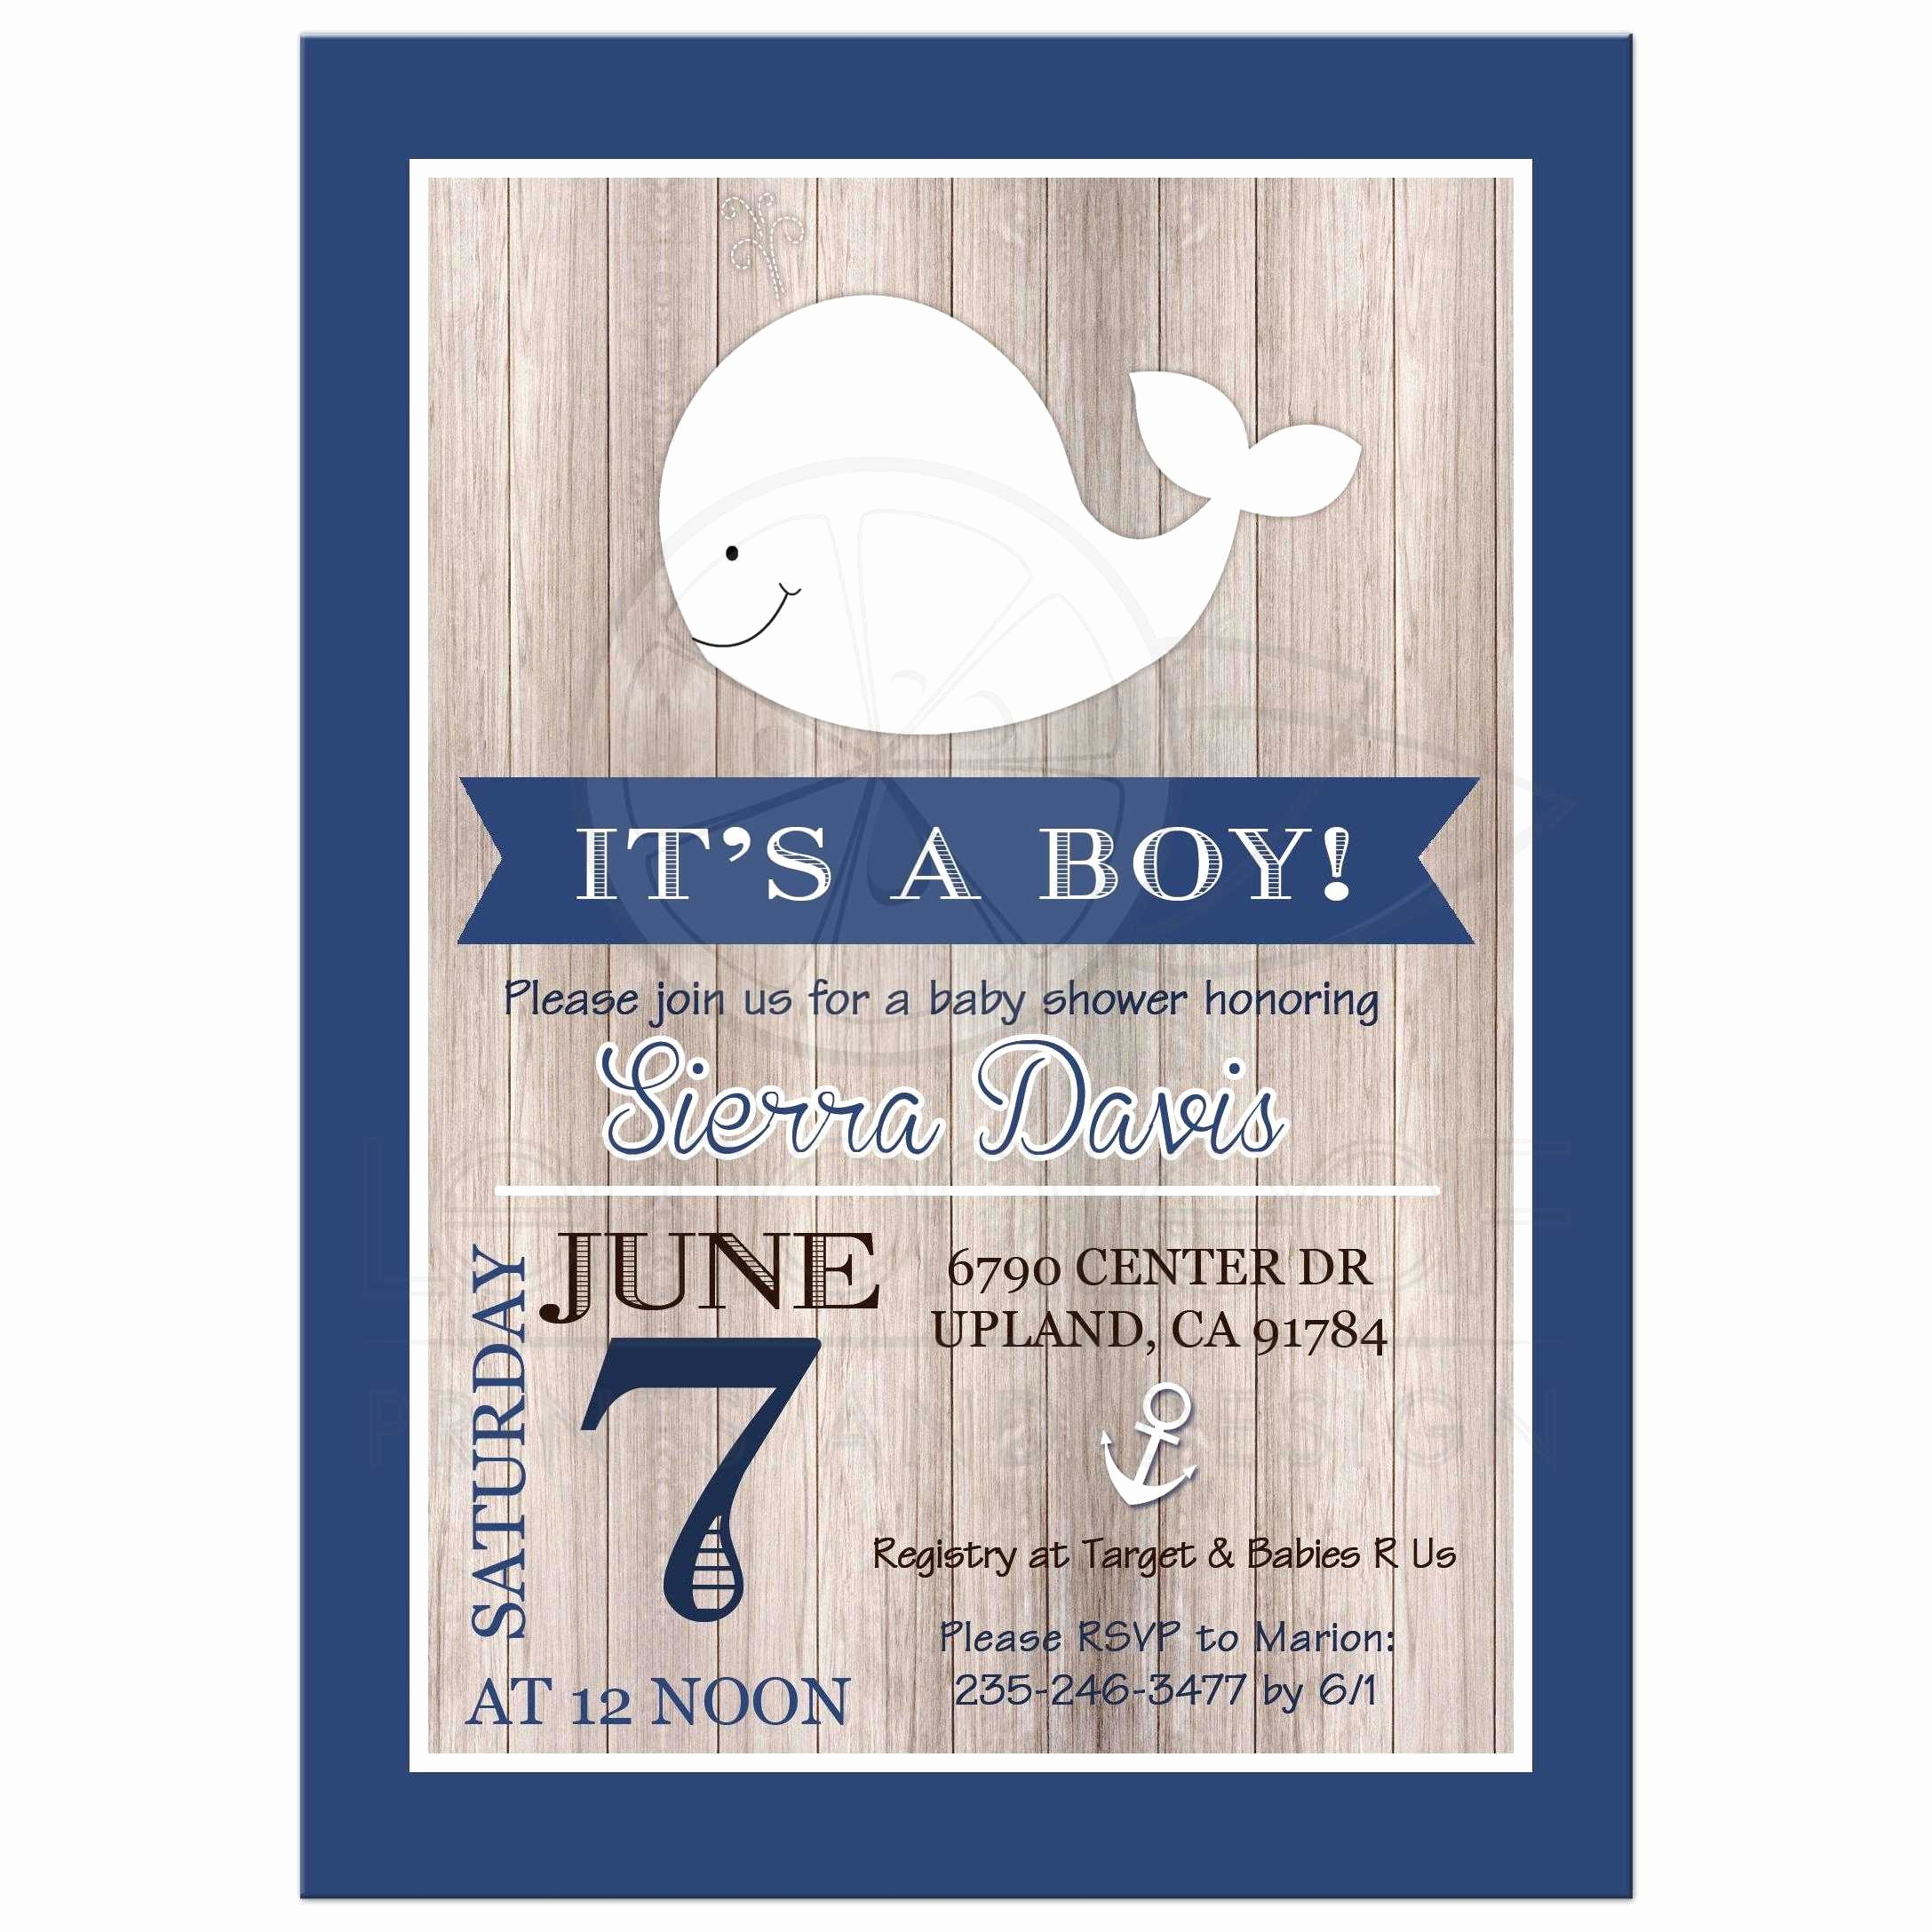 Nautical theme Baby Shower Invitation Best Of Rustic Nautical Whale White and Navy Baby Shower Invitation